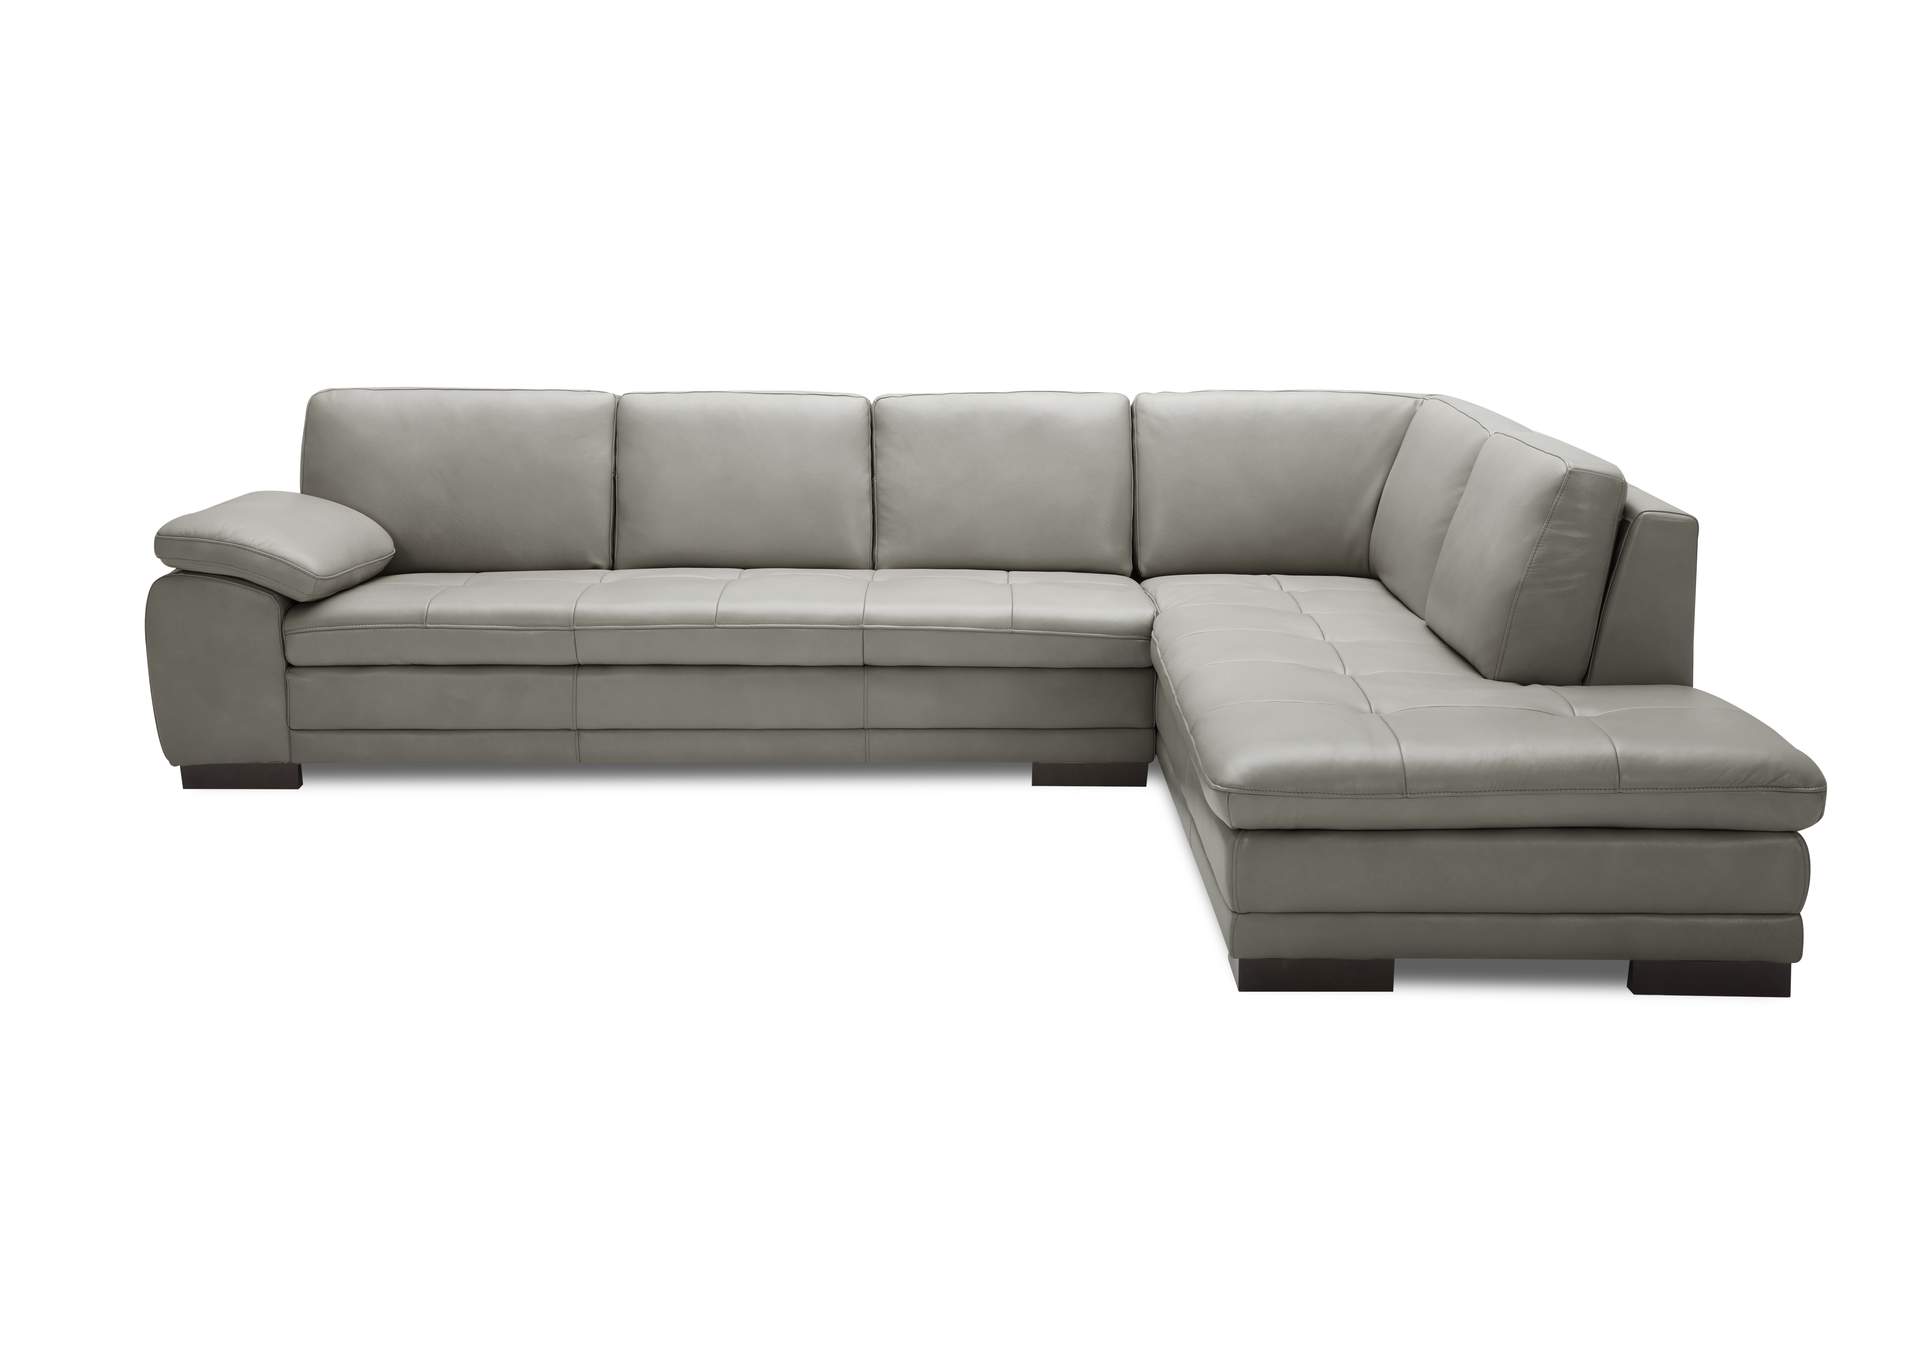 625 Italian Leather Sectional Grey In, Italian Leather Sectional